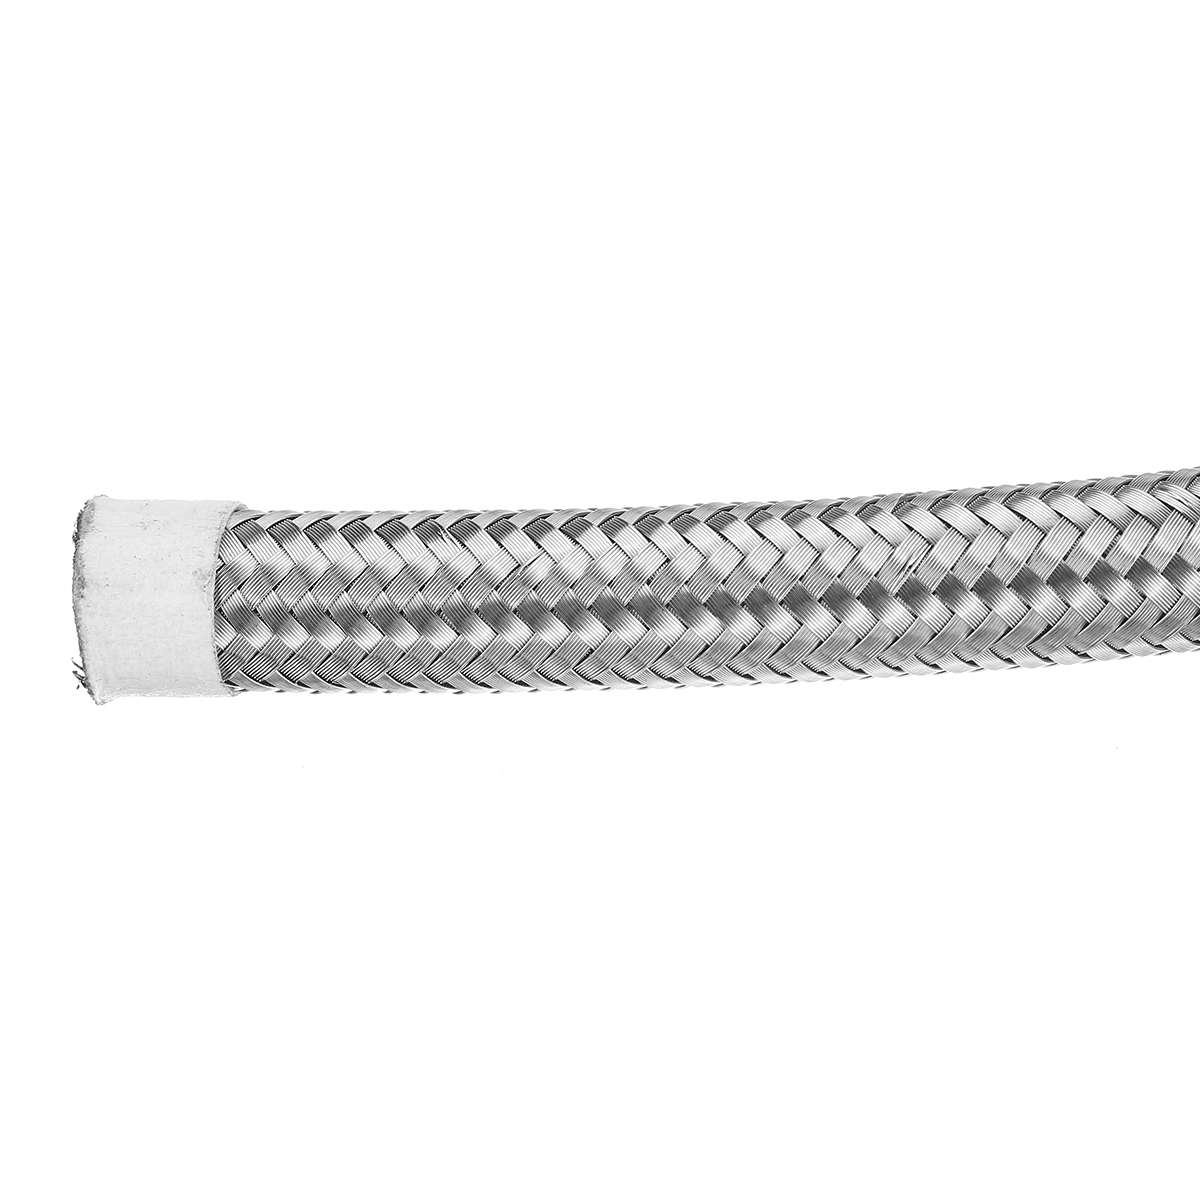 8FT-AN4-AN6-AN8-AN10-Fuel-Hose-Oil-Gas-Line-Pipe-Stainless-Steel-Braided-Silver-1685158-9